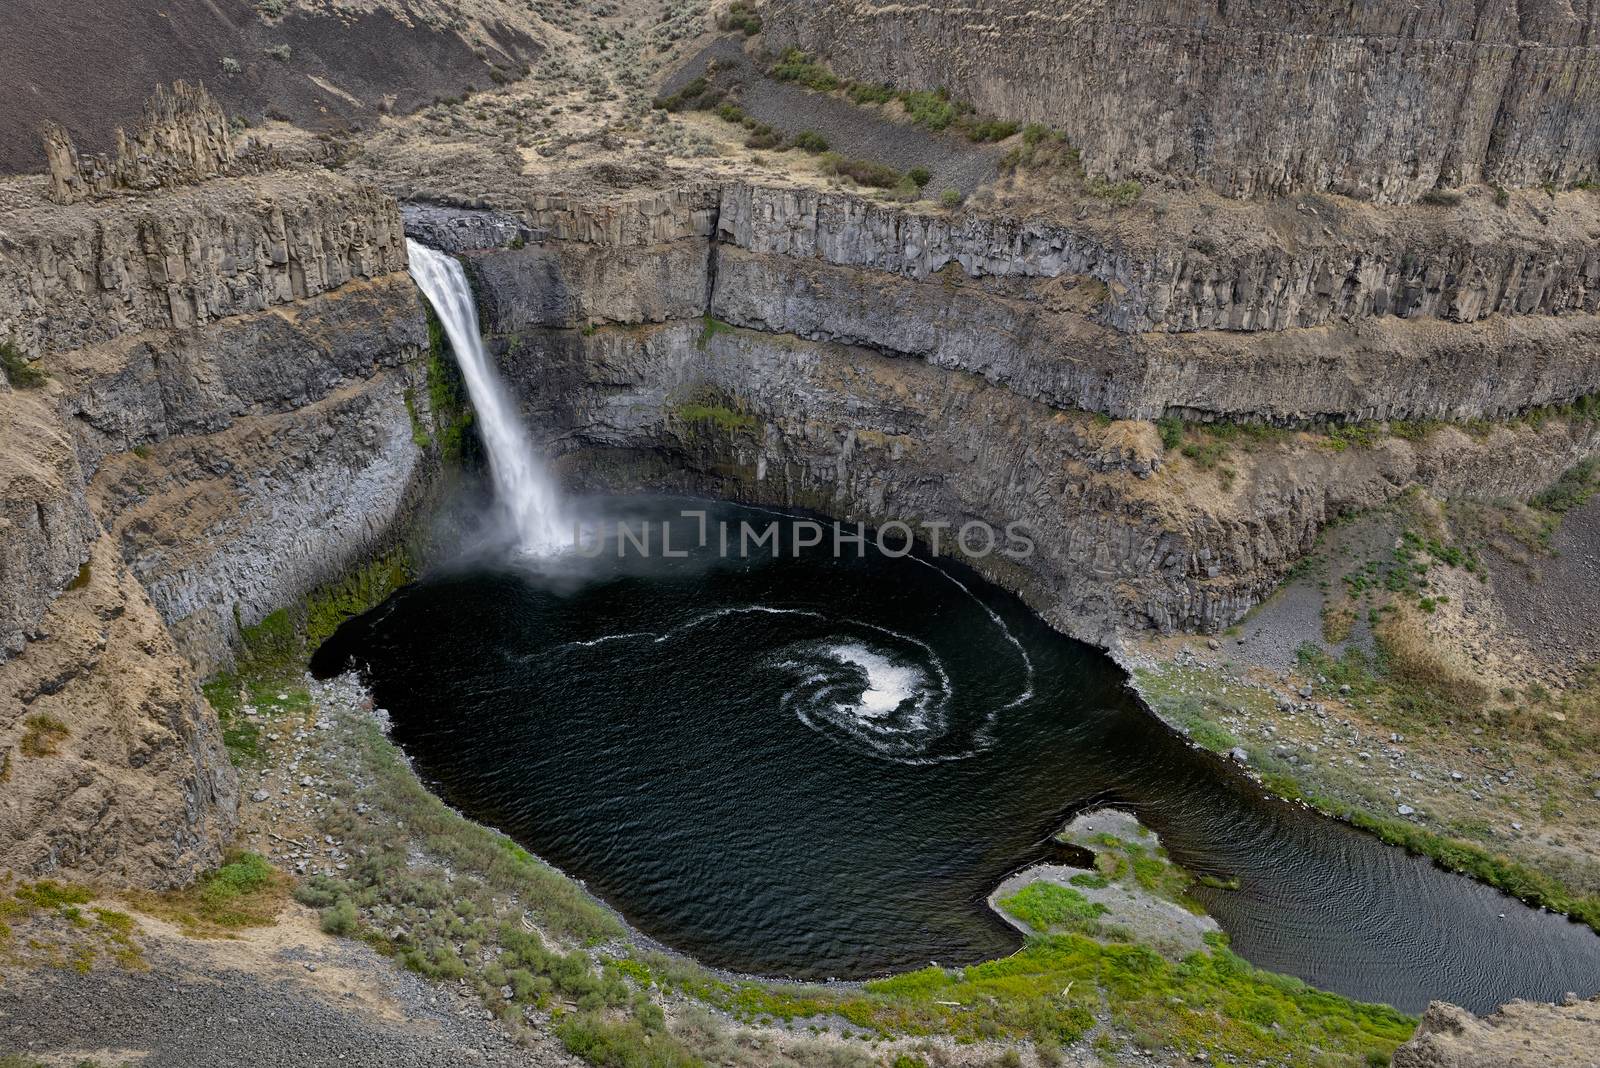 The canyon at the falls is 115 meters (377 feet) deep, exposing a large cross-section of the Columbia River Basalt Group. These falls and the canyon downstream are an important feature of the channeled scablands created by the great Missoula Floods that swept periodically across eastern Washington and across the Columbia River Plateau during the Pleistocene epoch. The ancestral Palouse river flowed through the currently dry Washtucna Coulee to the Columbia River. The Palouse Falls and surrounding canyons were created when the Missoula Floods overtopped the south valley wall of the ancestral Palouse River, diverting it to the current course to the Snake River by erosion of a new channel. The area is characterized by interconnected and hanging flood-created coulees, cataracts, plunge pools, kolk created potholes, rock benches, buttes and pinnacles typical of scablands. Palouse Falls State Park is located at the falls, protecting this part of the uniquely scenic area.
